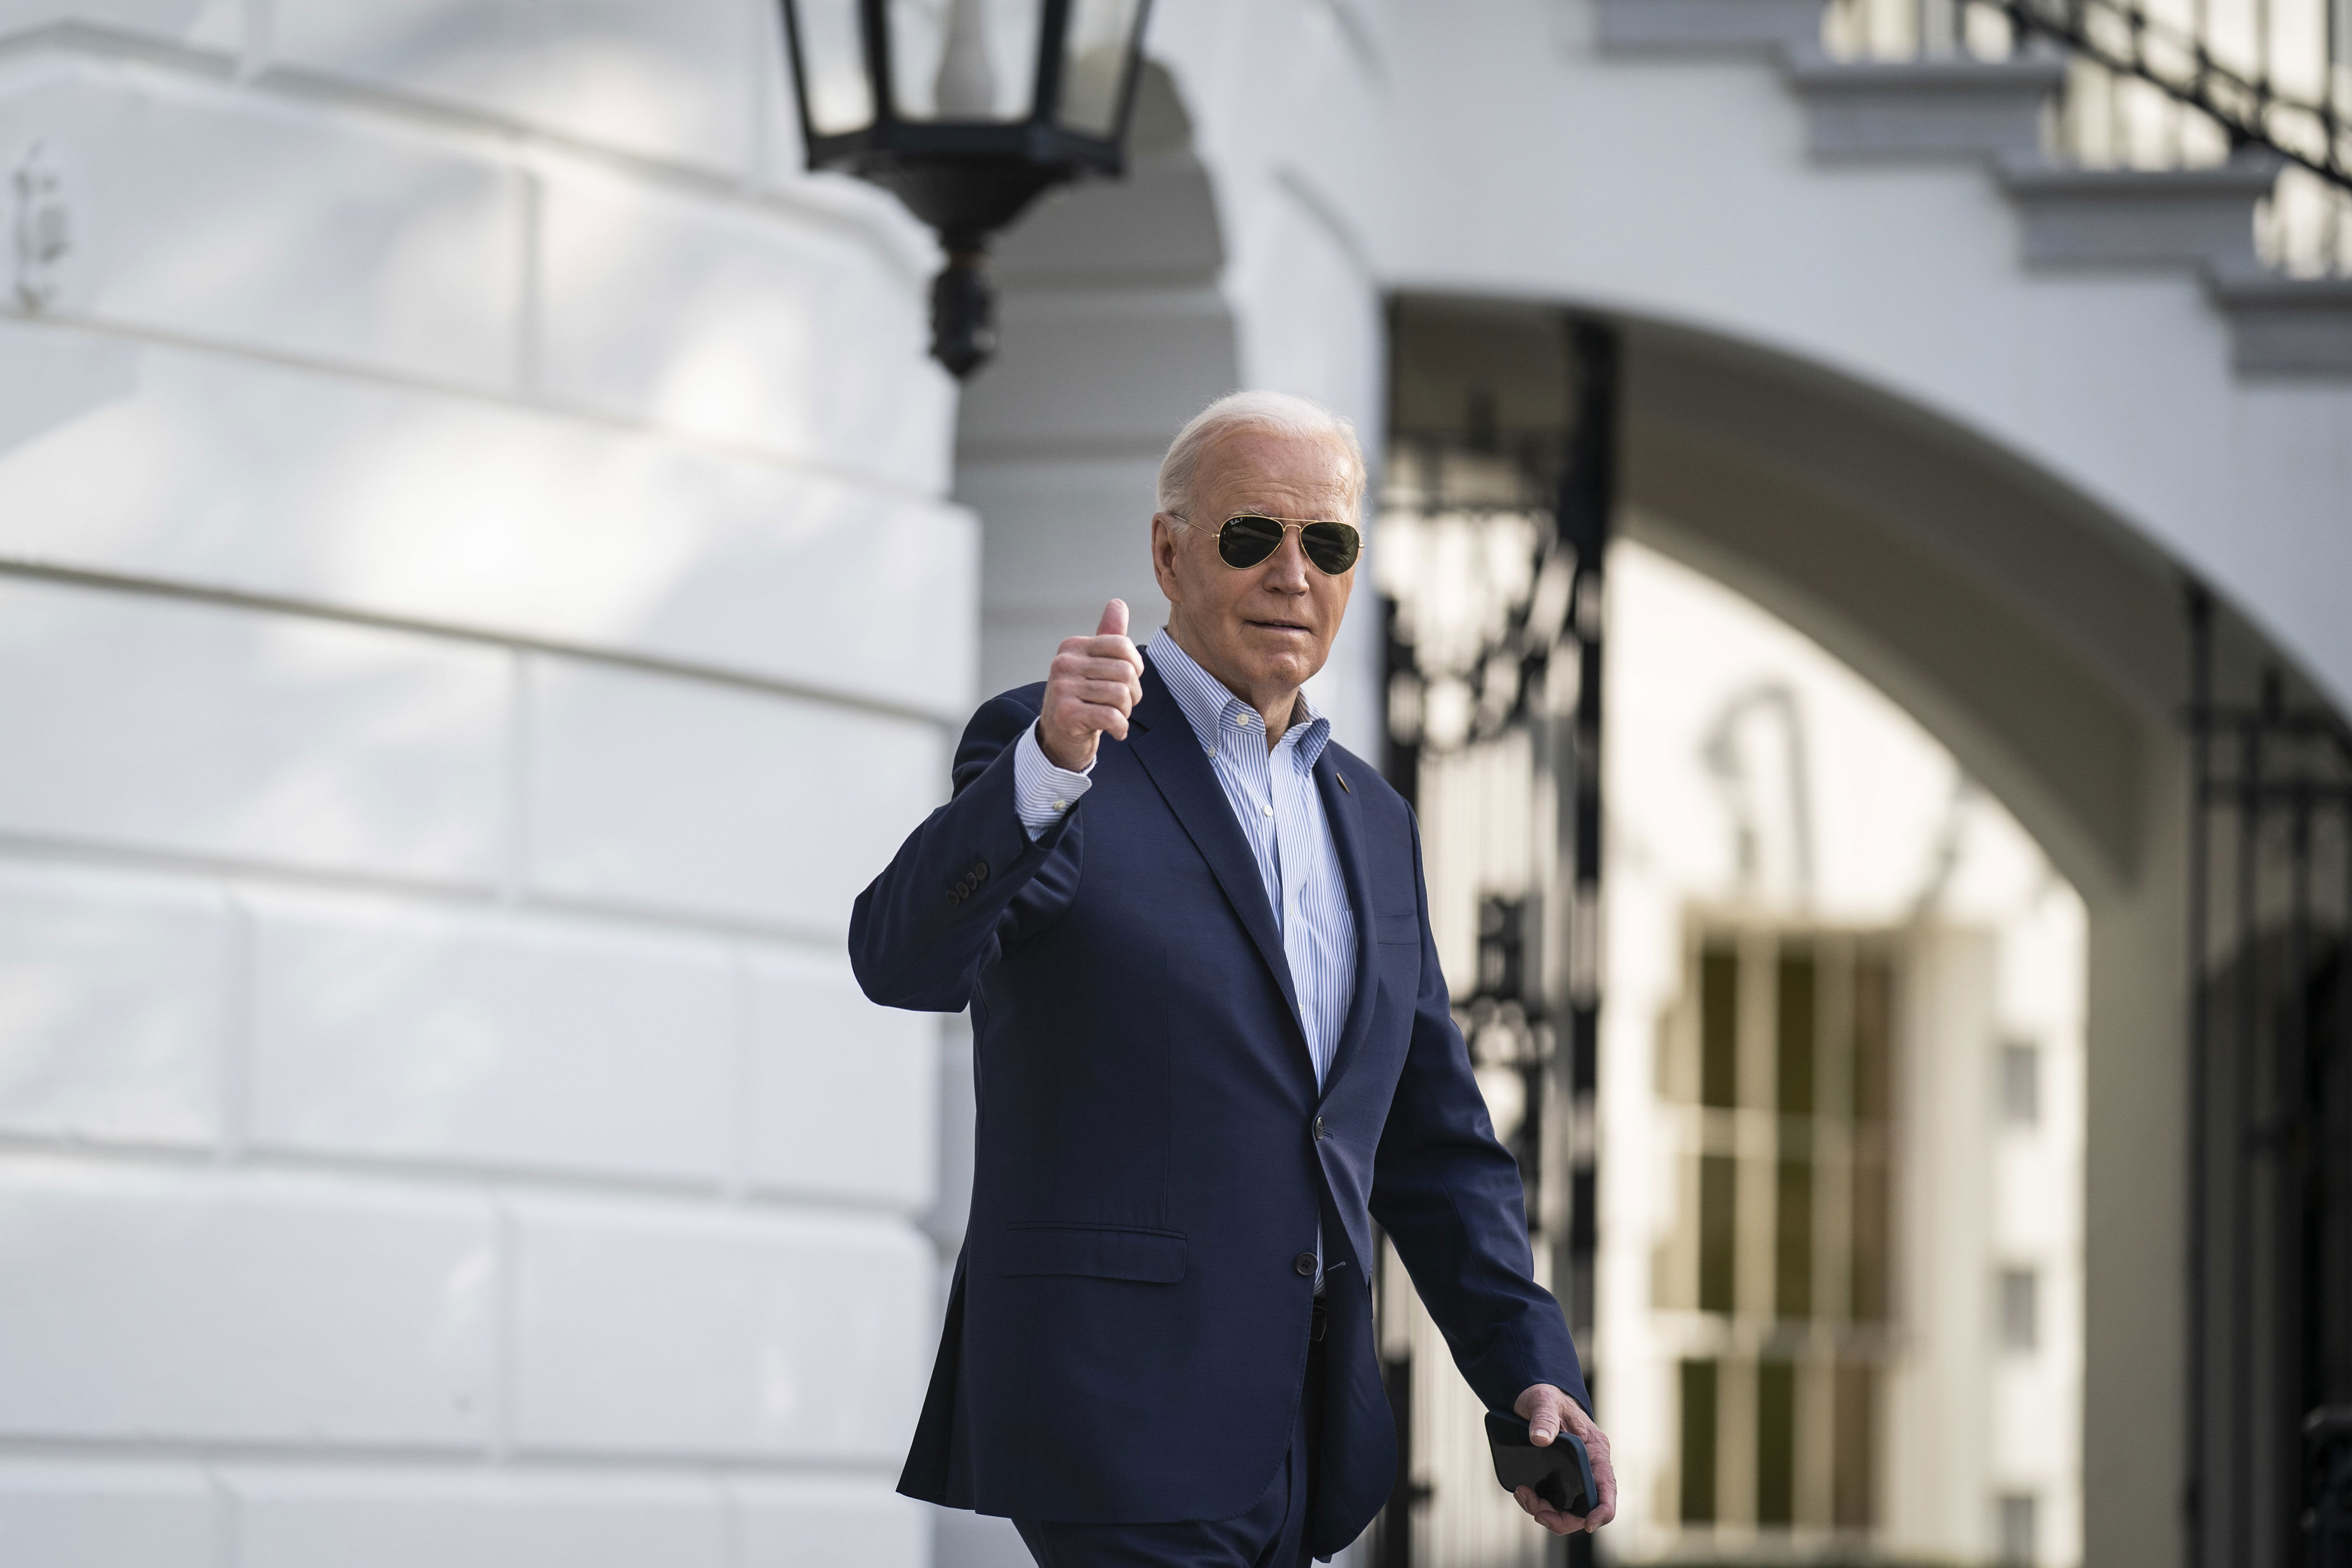 election 2024 latest news: biden poised to raise $25 million at fundraiser with obama, clinton